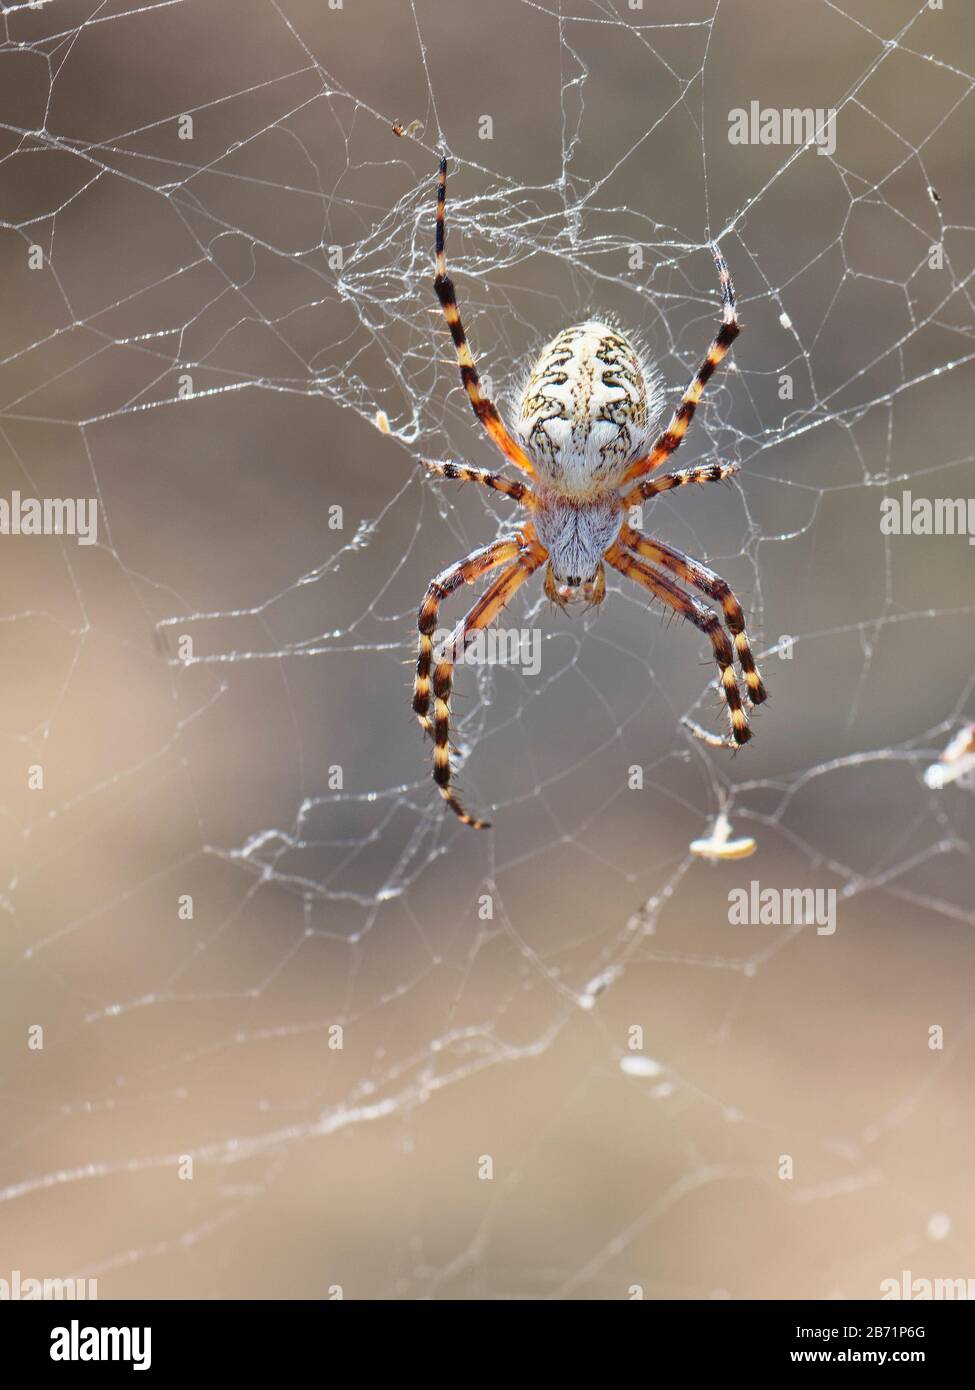 Teide spider (Aculepeira annulipes), an orb weaver spider endemic to Teide National Park, Tenerife, Canary Islands, August. Stock Photo